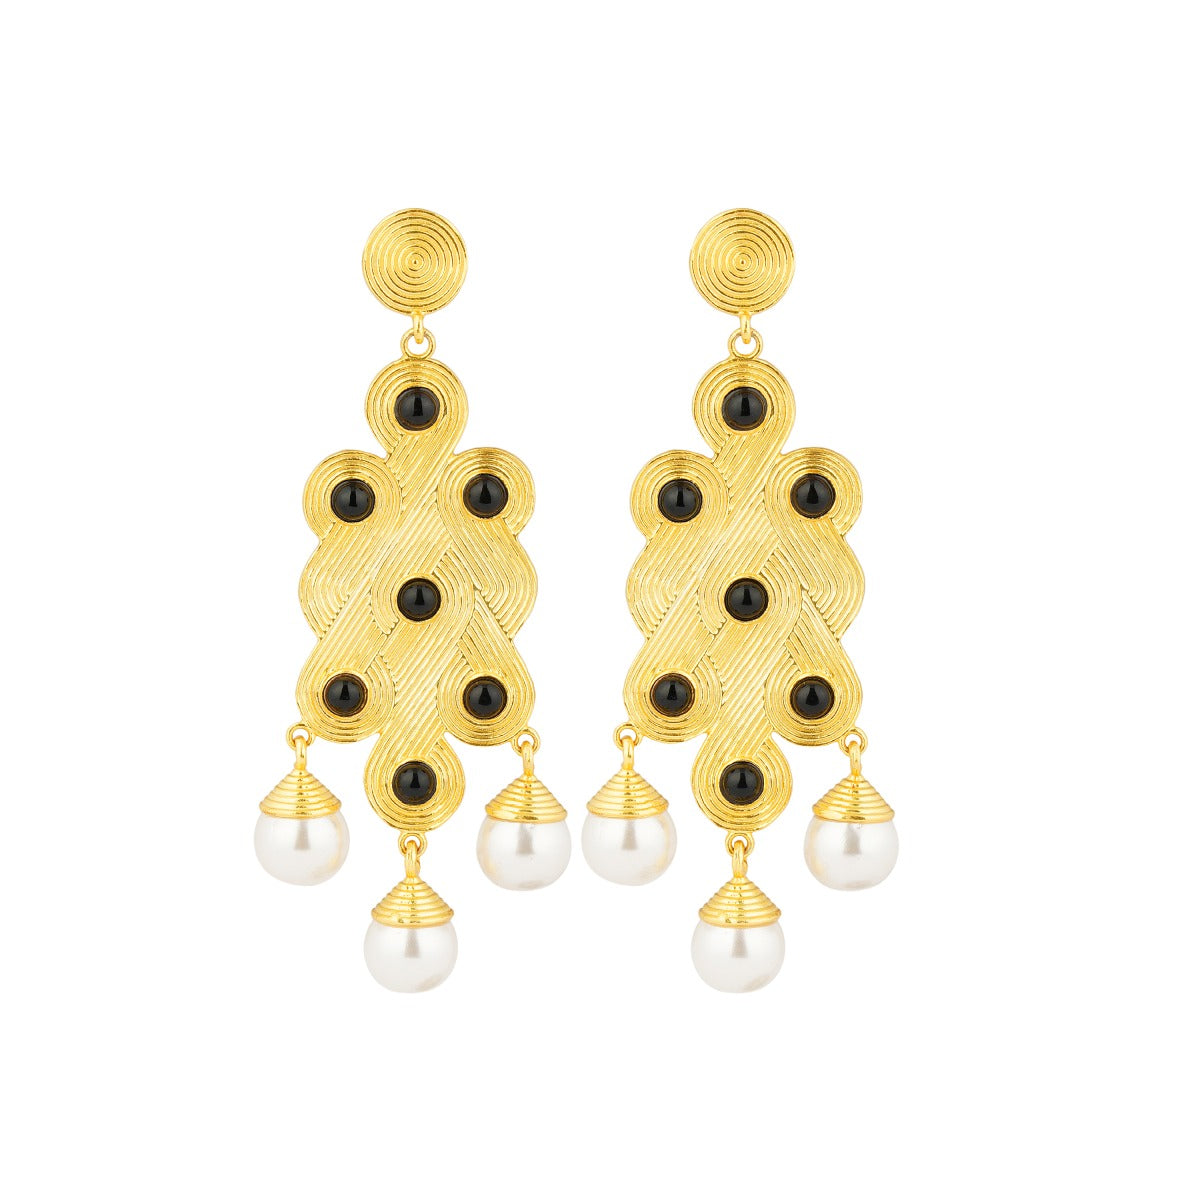 Gold Pearl Chand Balli Earrings Bollywood Wedding Indian Chandelier  Earrings Jewelry Set : Amazon.ca: Clothing, Shoes & Accessories